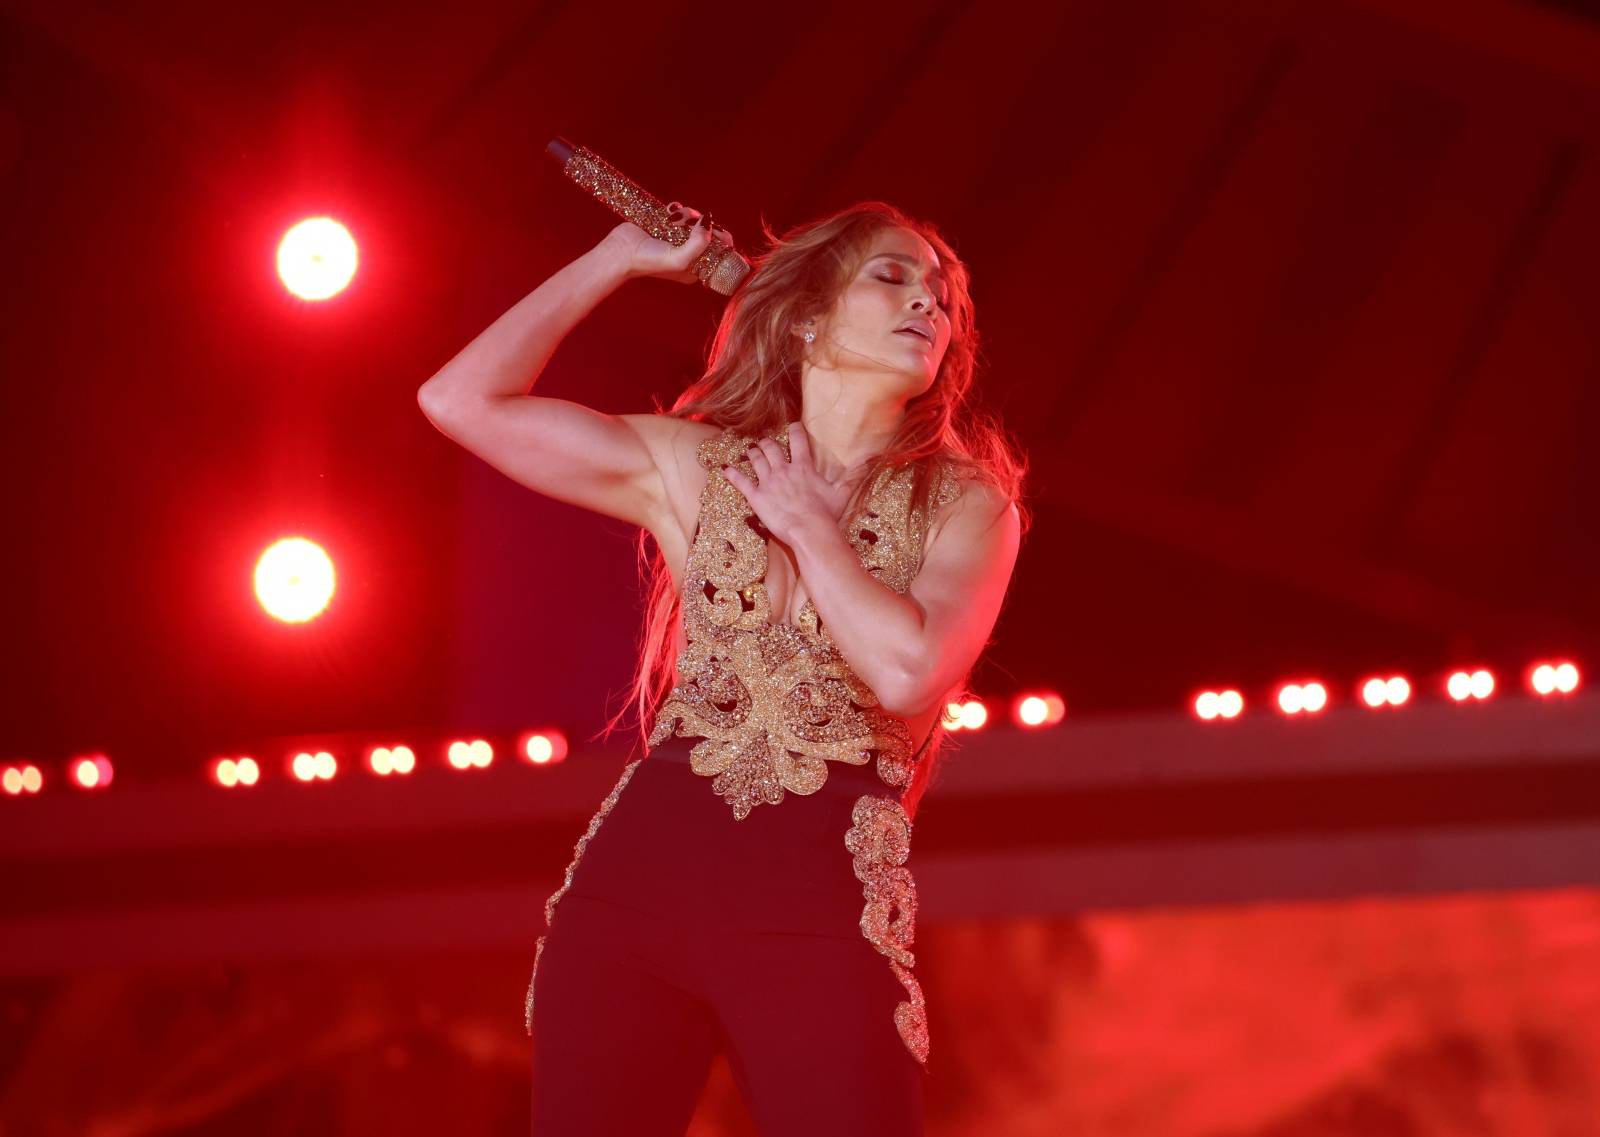 Jennifer Lopez performs at the 2021 Global Citizen Live concert at Central Park in New York